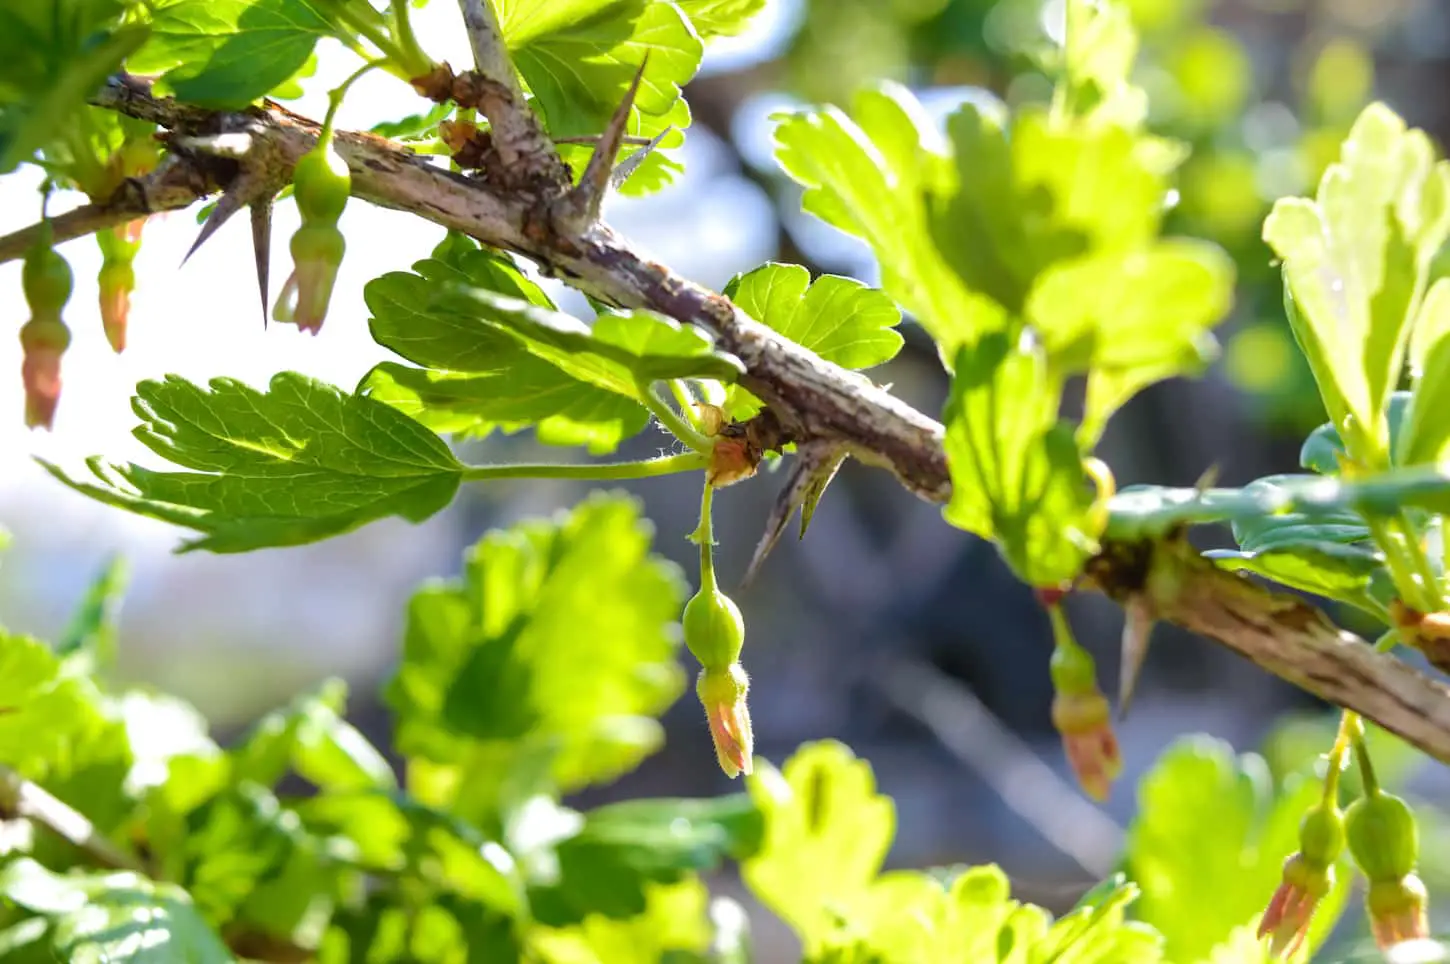 An image of green gooseberry branches with unripe berries in a garden during springtime.